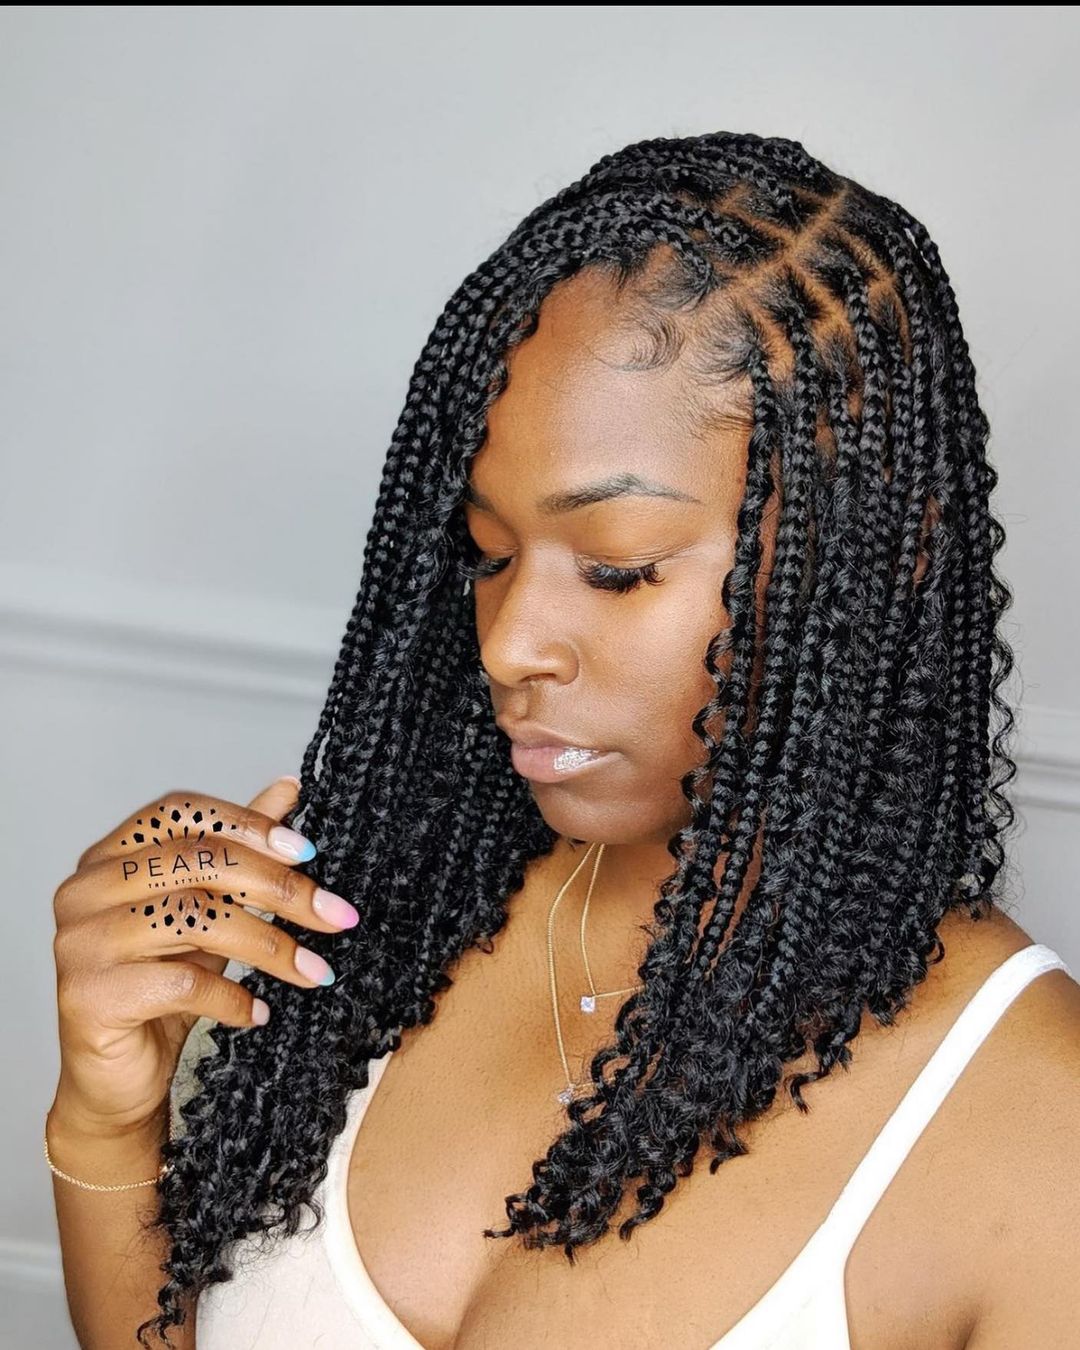 35 Knotless Box Braids That Will Inspire You to Experiment Hairstylery